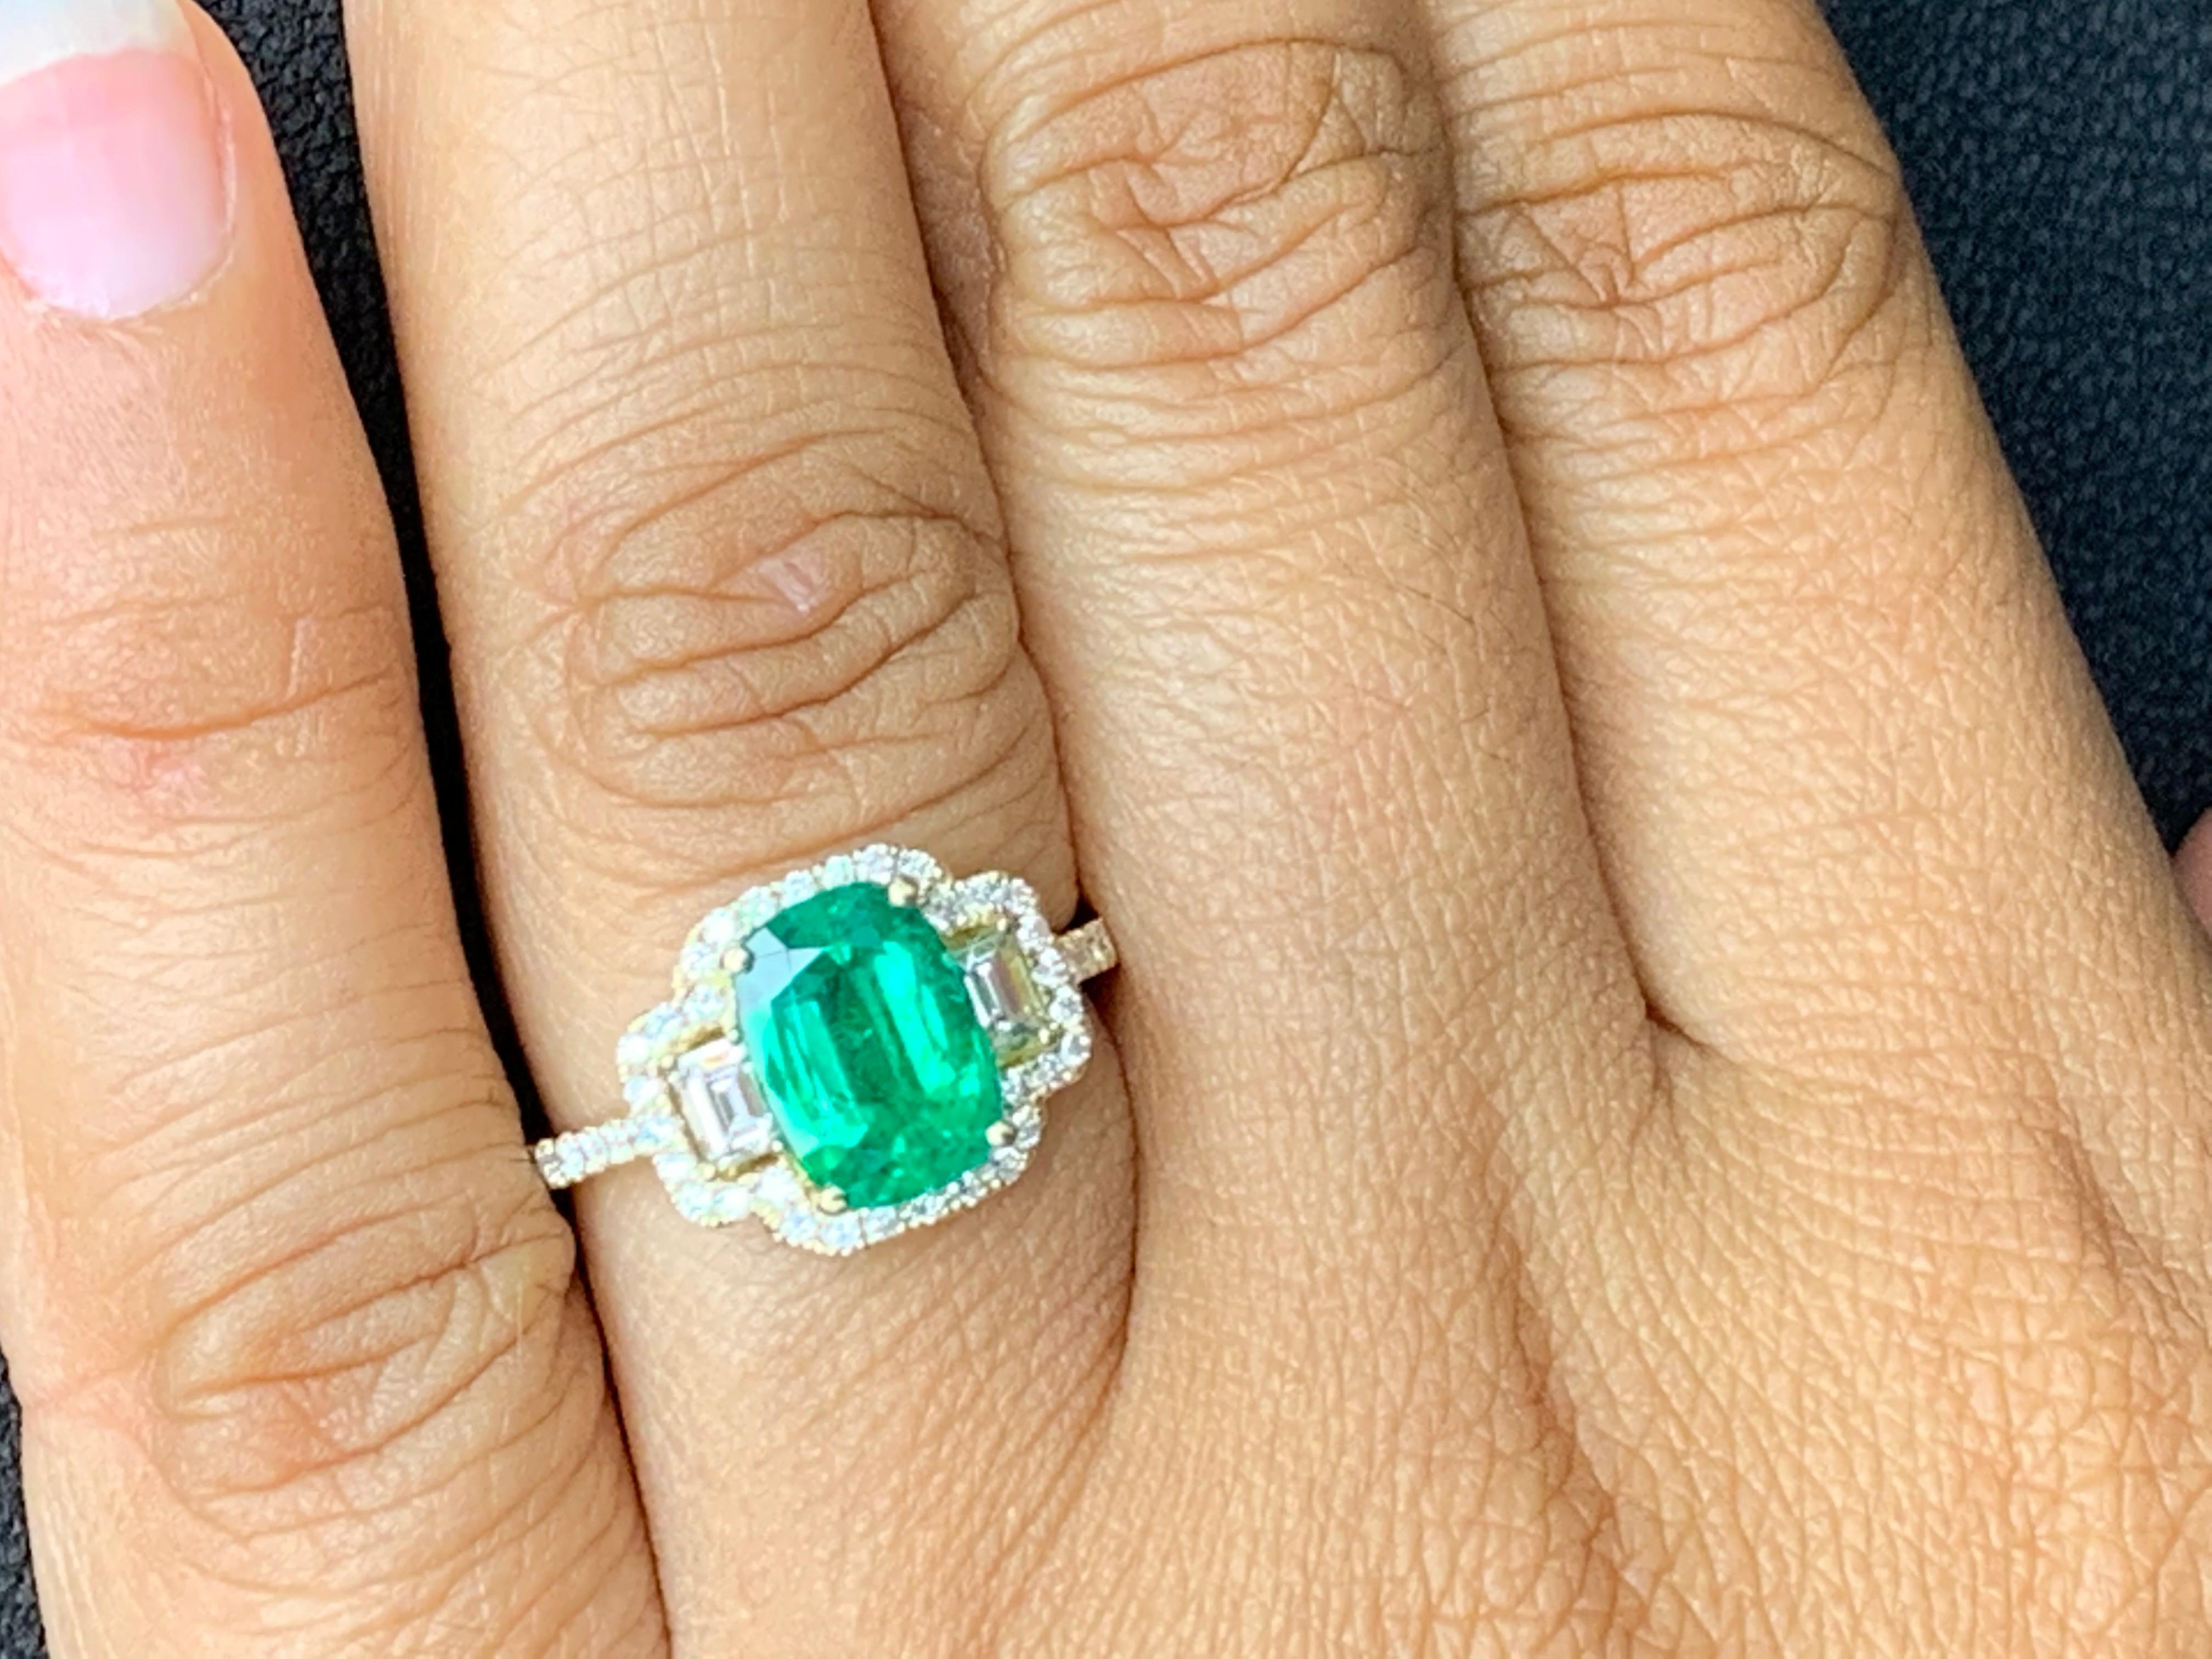 A unique handcrafted engagement ring showcasing a 2.07-carat cushion cut emerald. Flanking the center stone are two baguette white diamonds weighing 0.29 carat surrounded by a row of 48 brilliant-cut round diamonds set in a mounting made in 18K